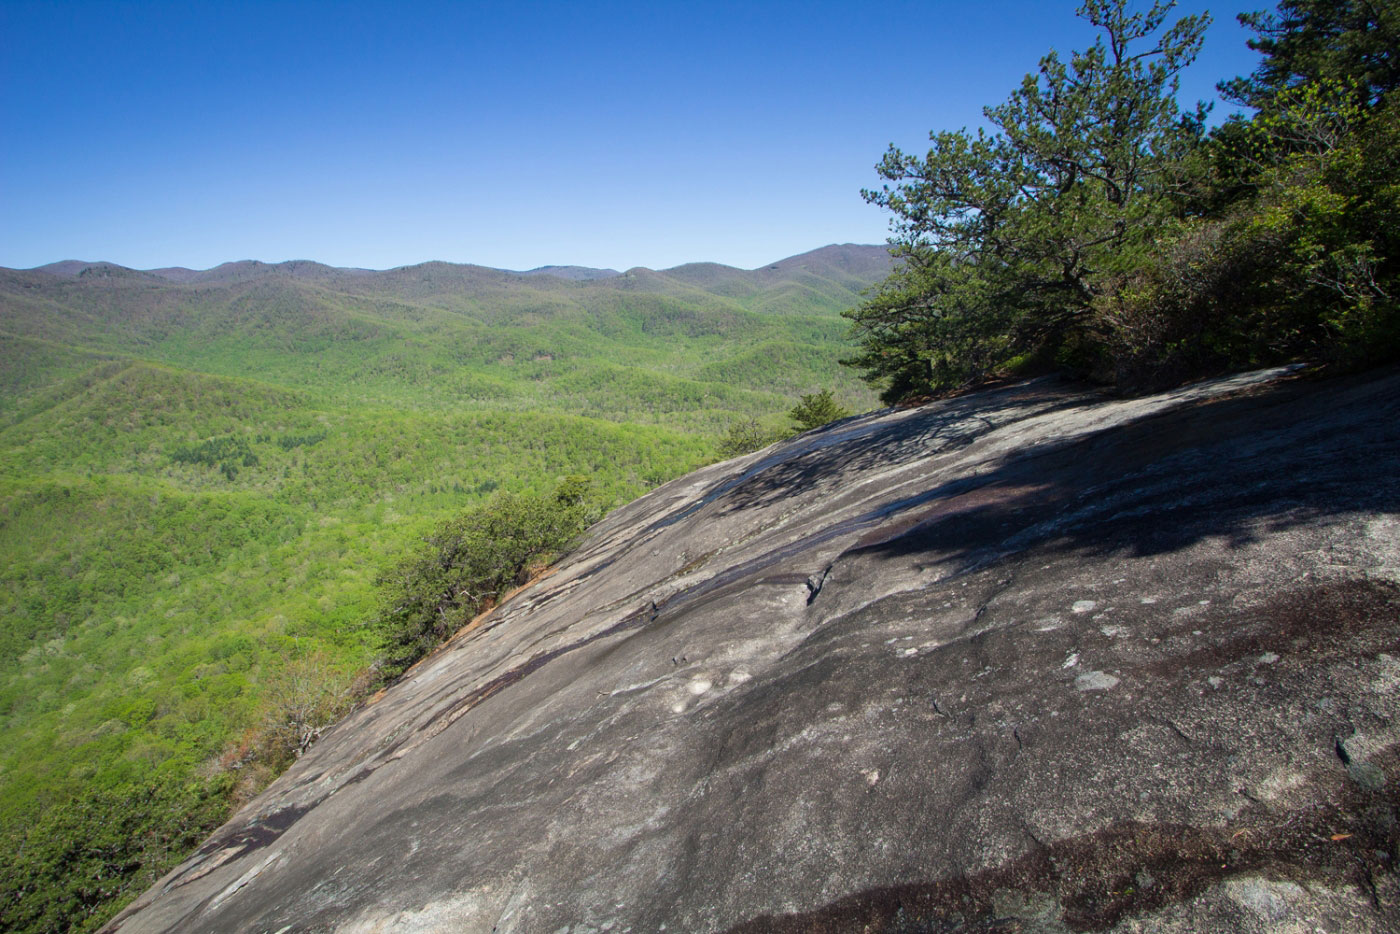 Hike Looking Glass Rock in Pisgah National Forest, North Carolina - Stav is Lost